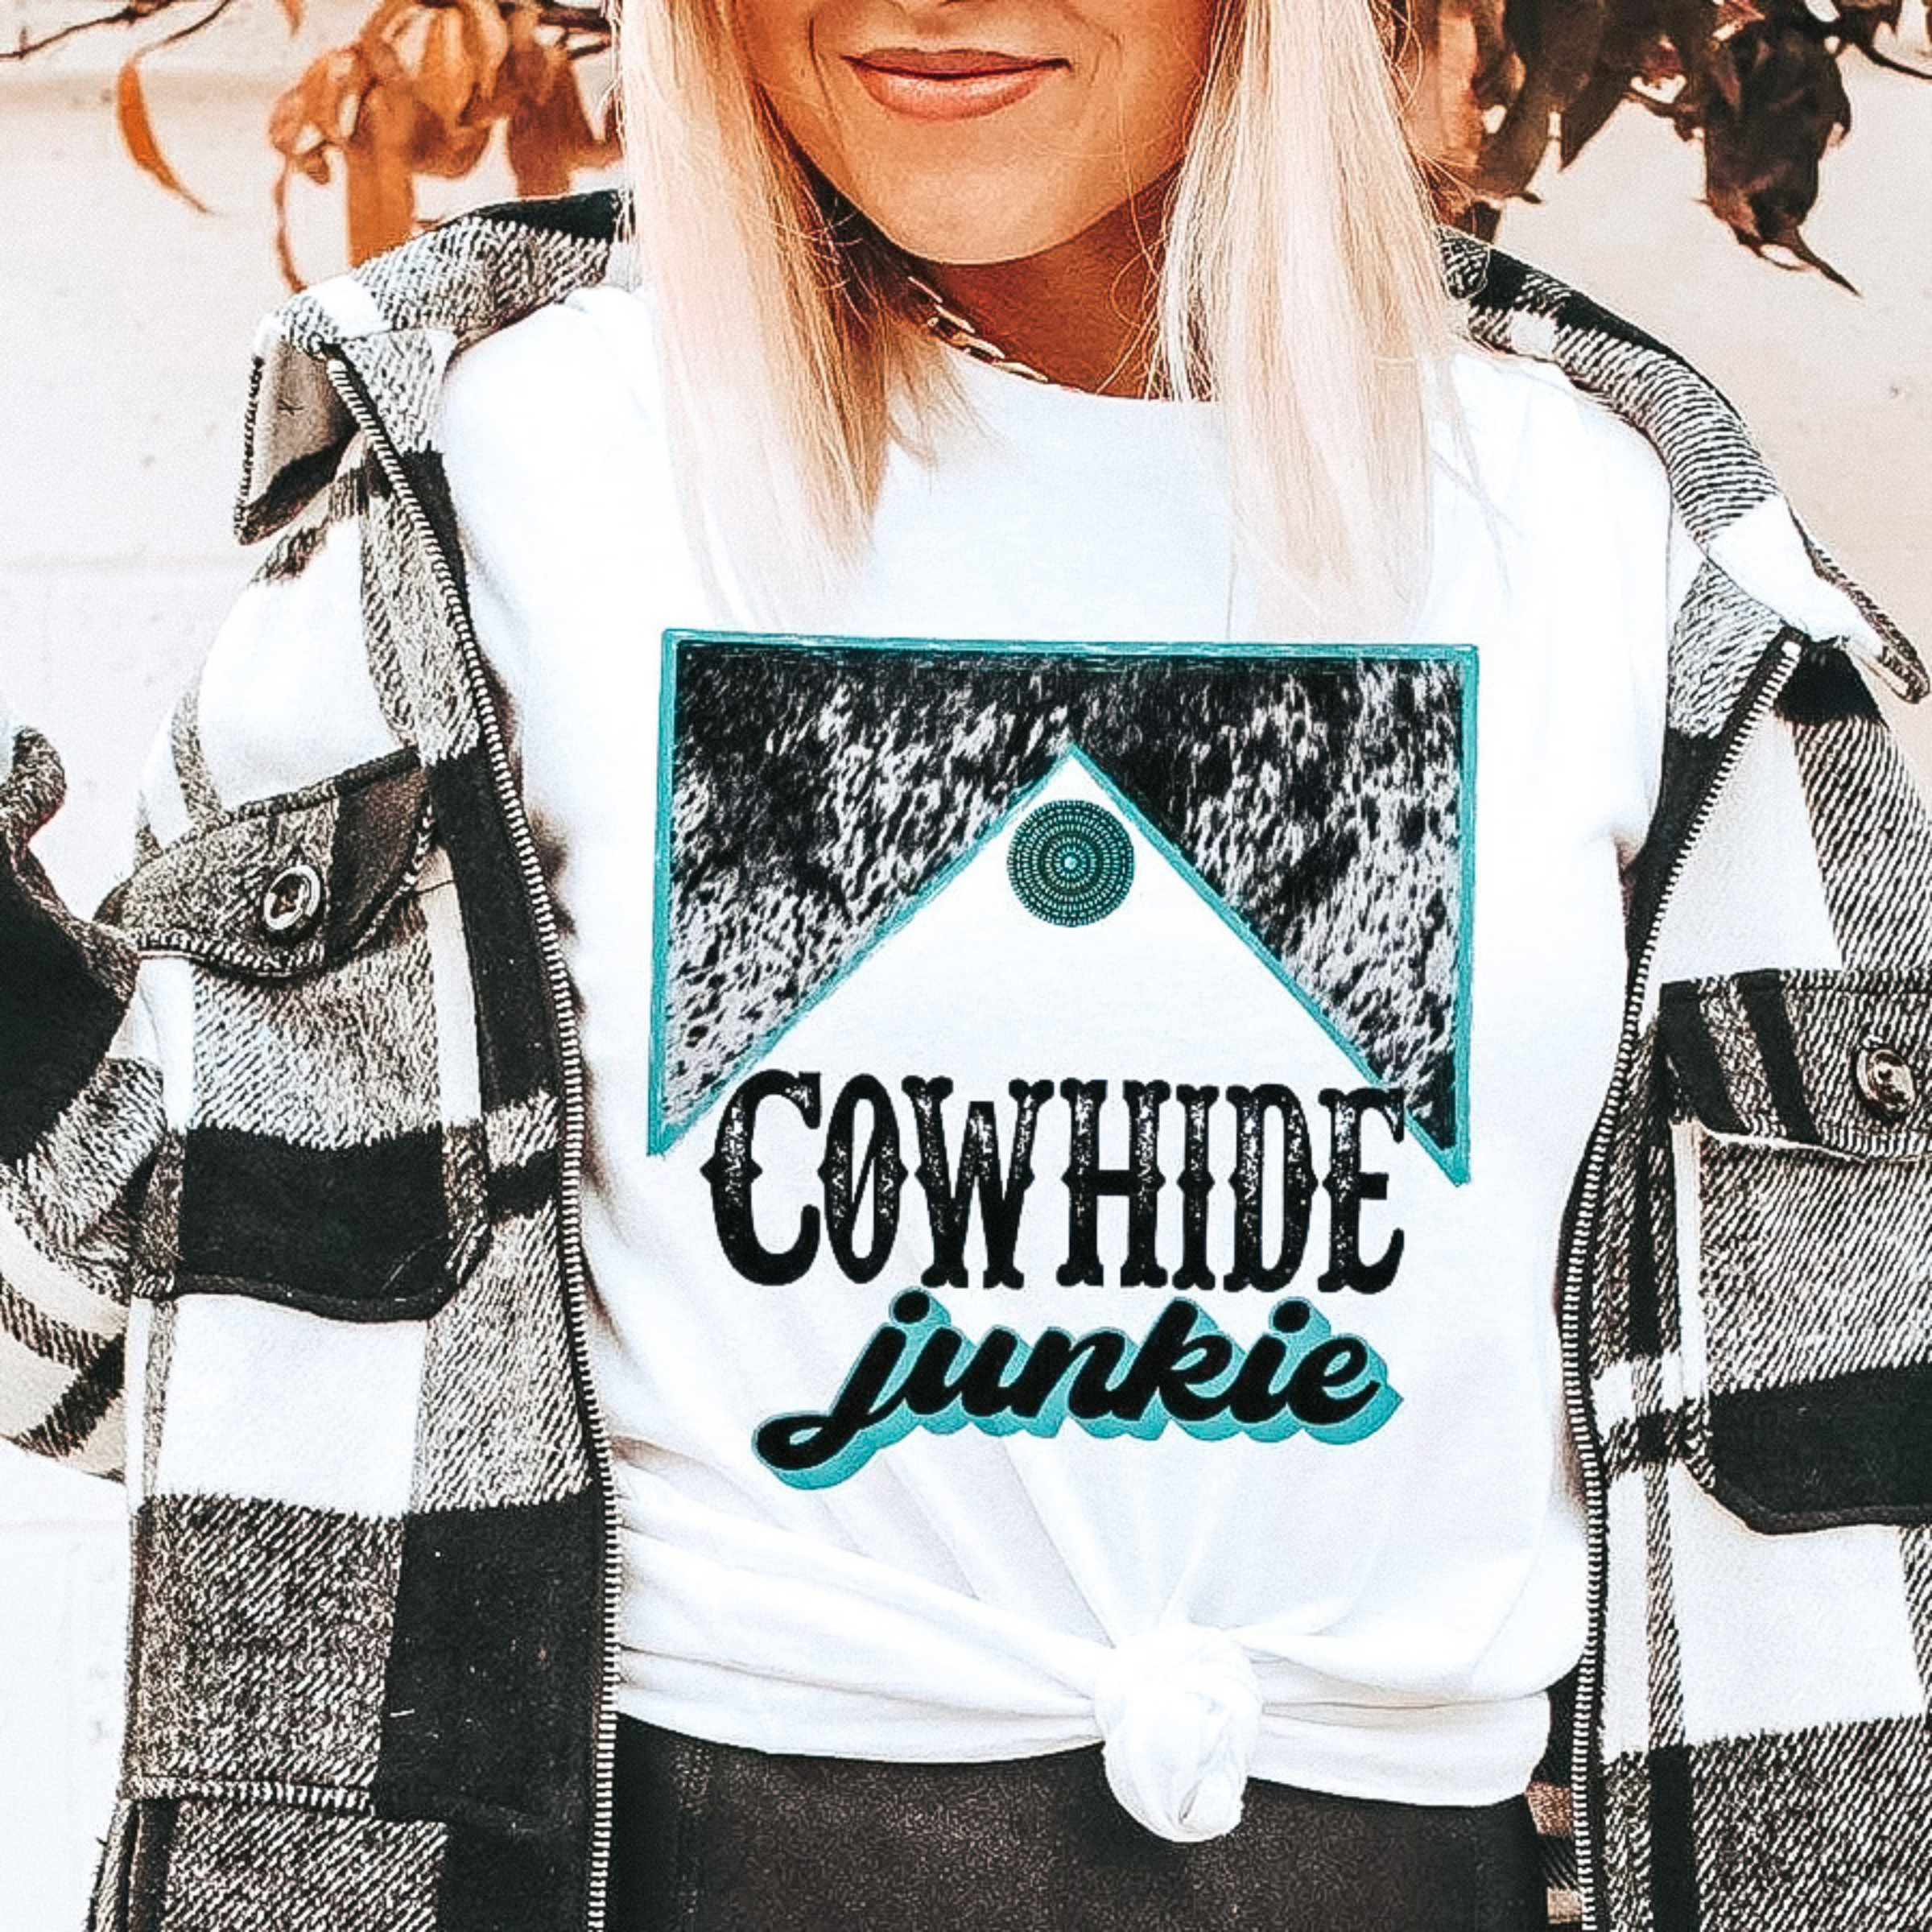 Model is wearing a white graphic tee that says "Cowhide Junkie" with a turquoise and cowhide graphic. Model has it paired with a black and white buffalo plaid jacket.